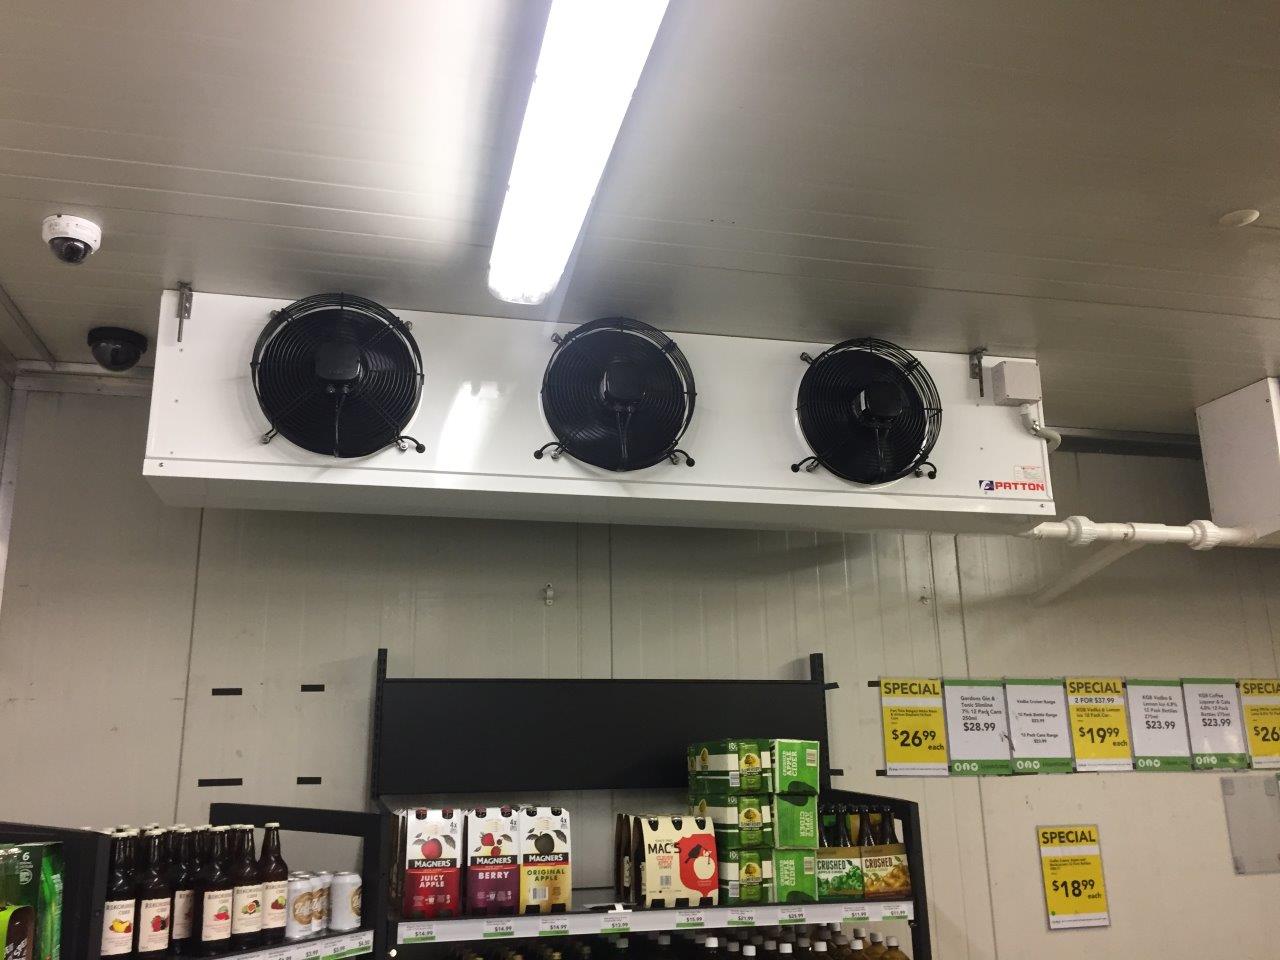 Refrigeration units inside the cool room